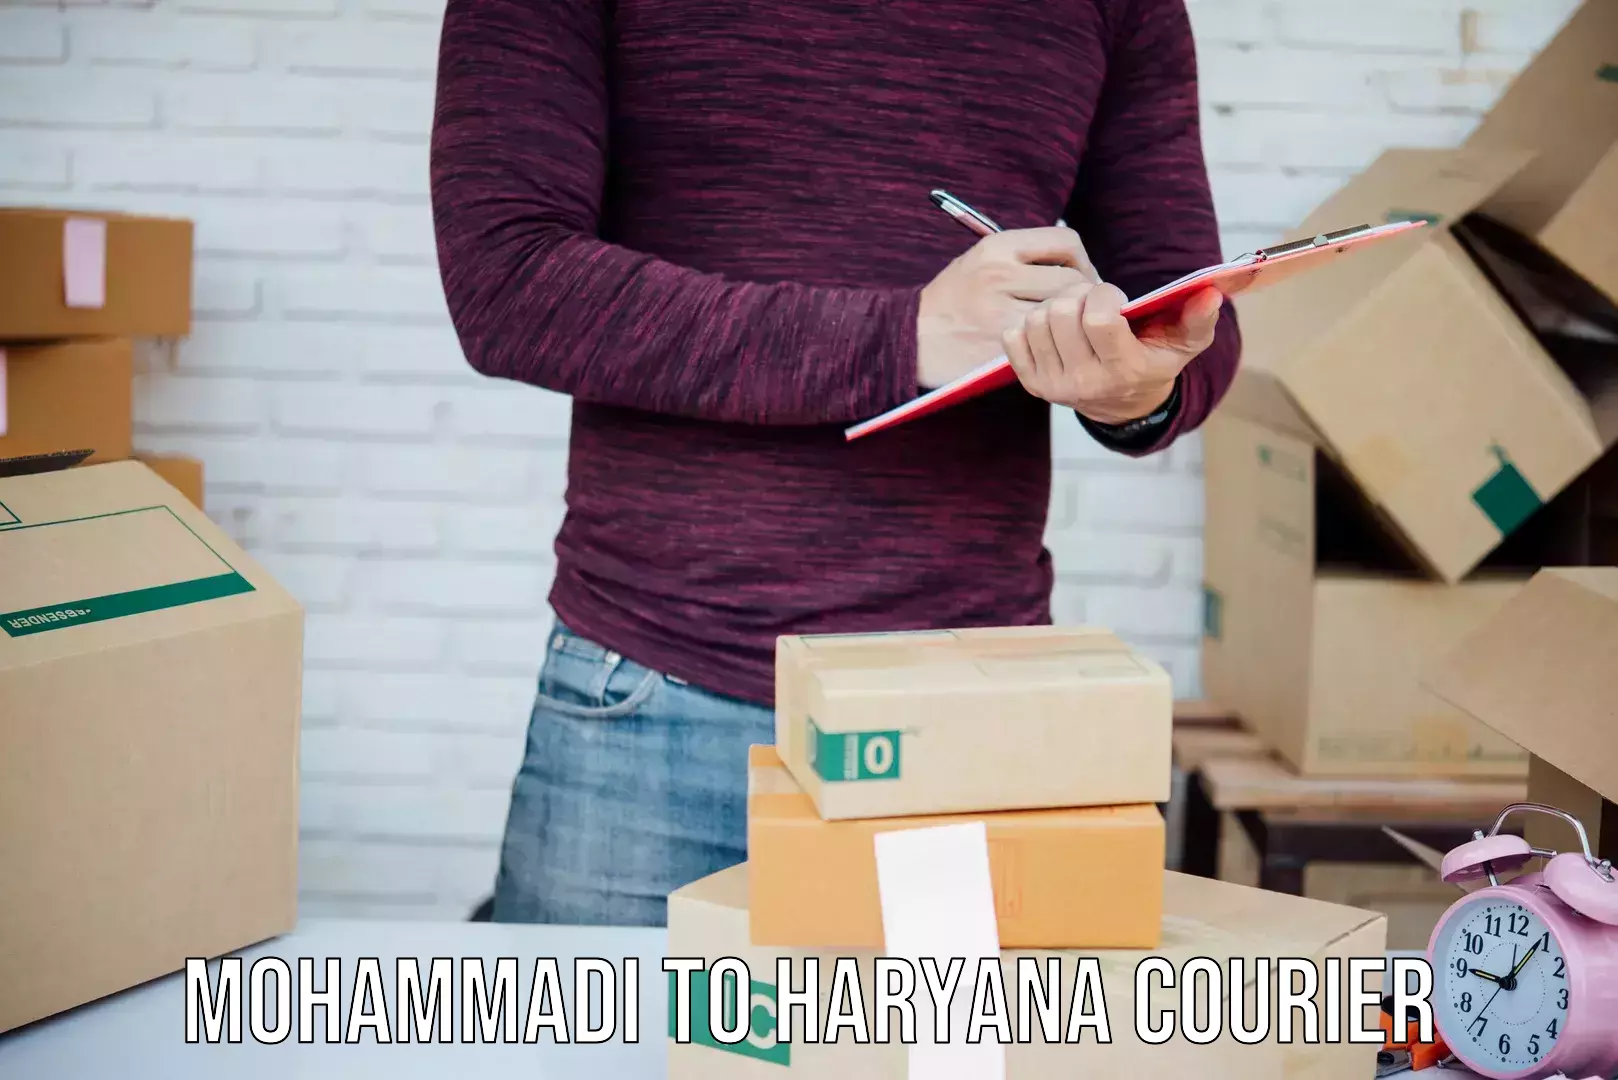 Reliable delivery network Mohammadi to Haryana